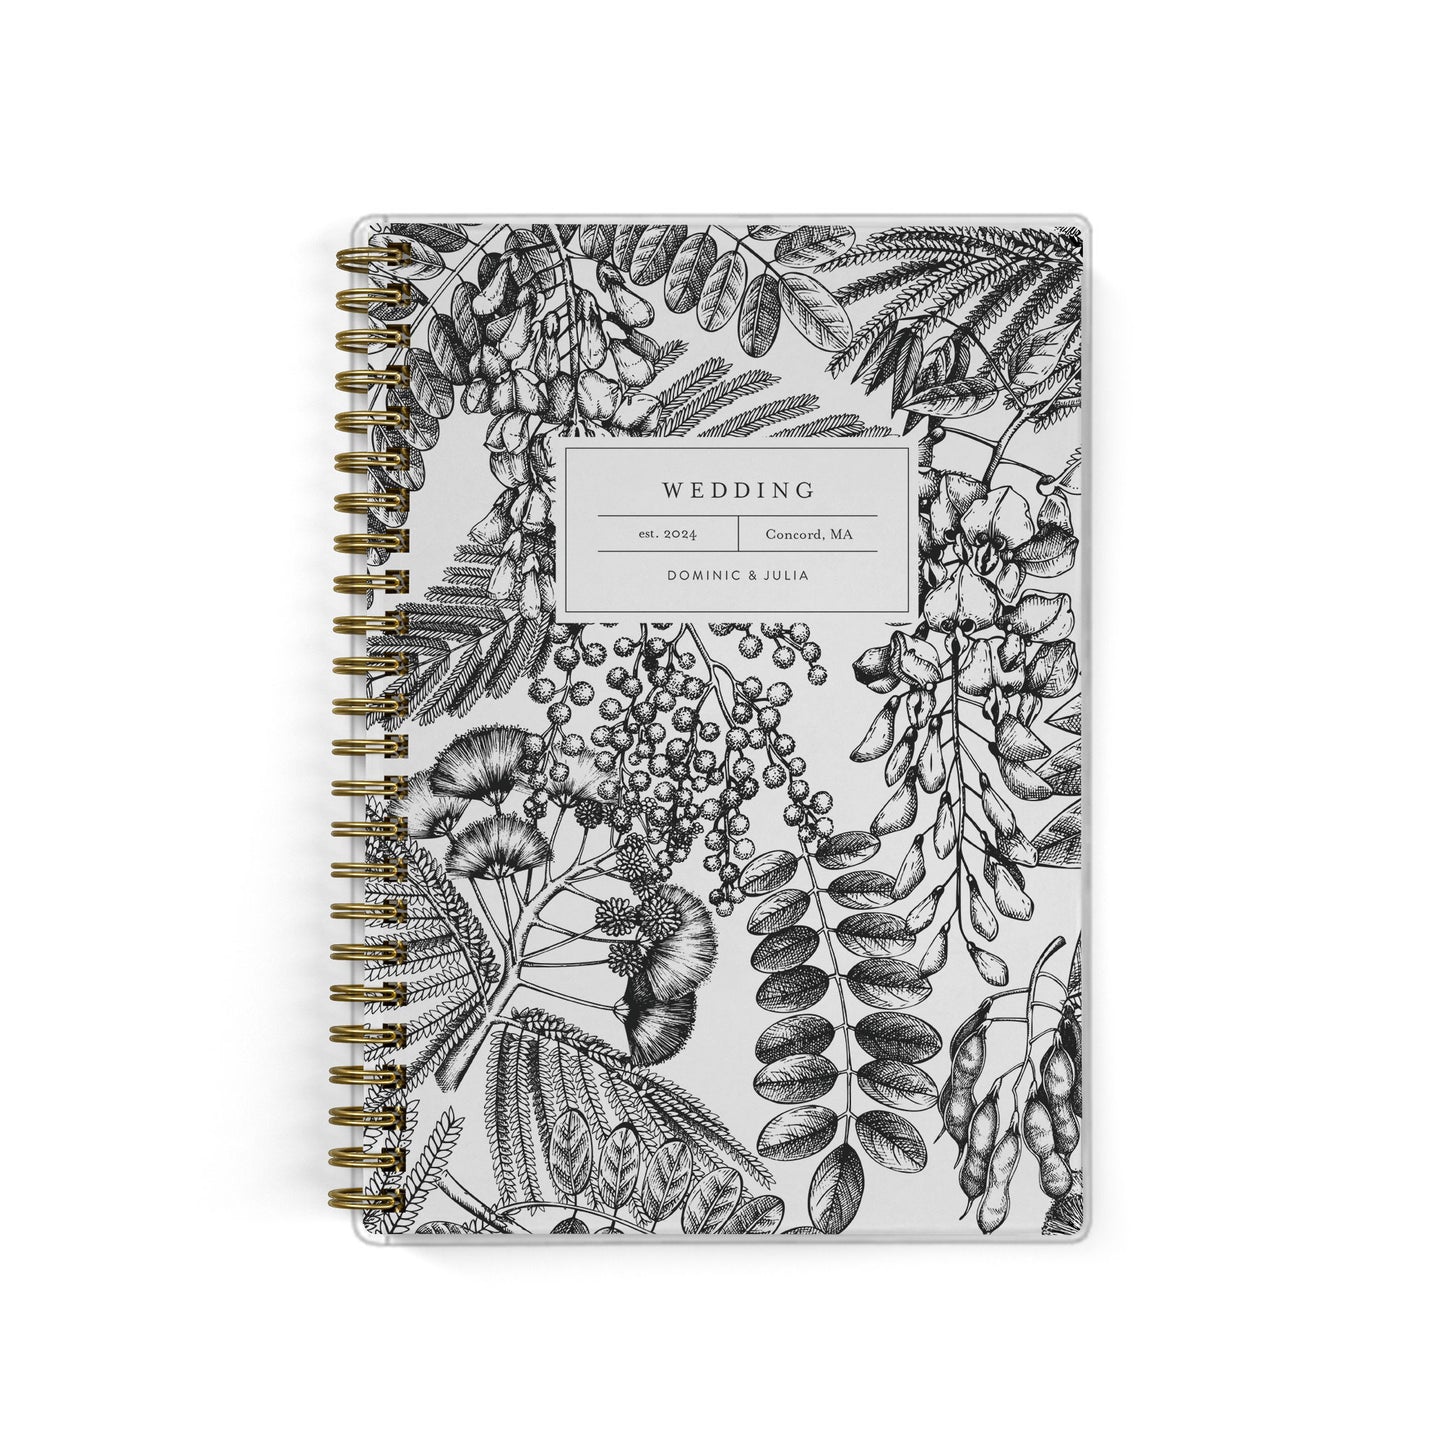 Our exclusive mini wedding planners are perfect for planning small weddings and elopements, shown in a black and white fern and foliage print